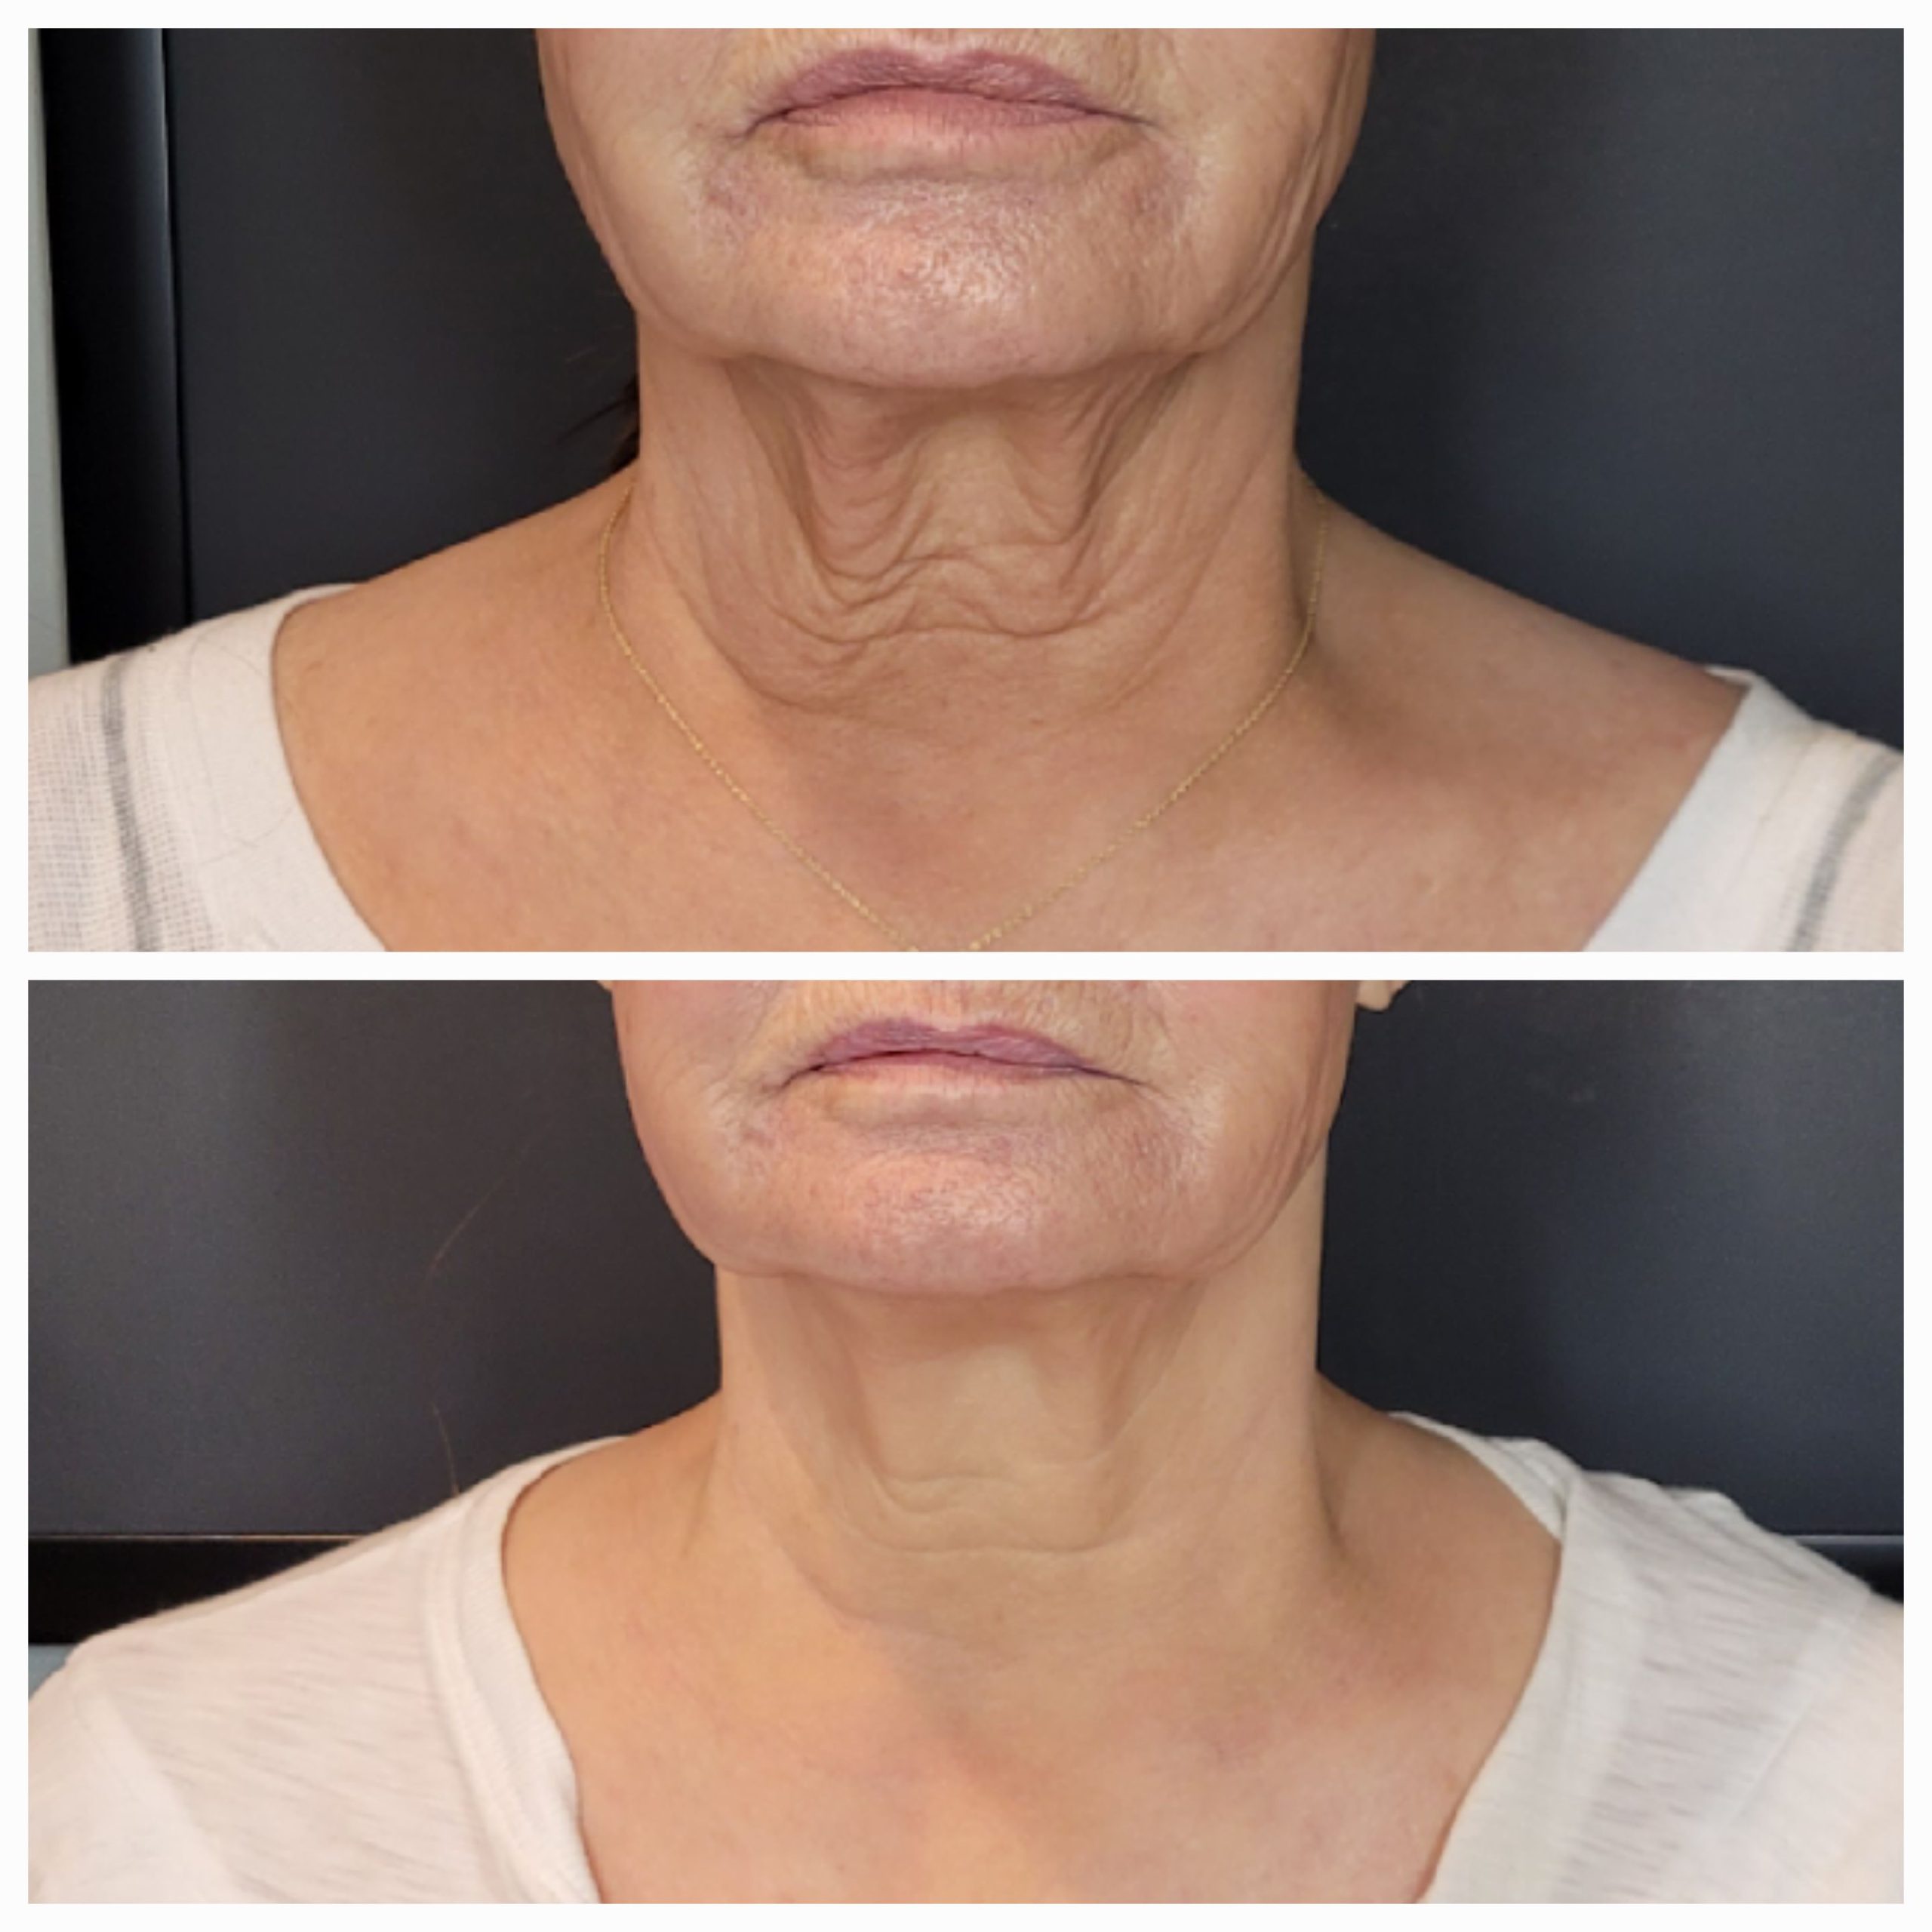 Before & after photos of woman's neck treated with Sofwave